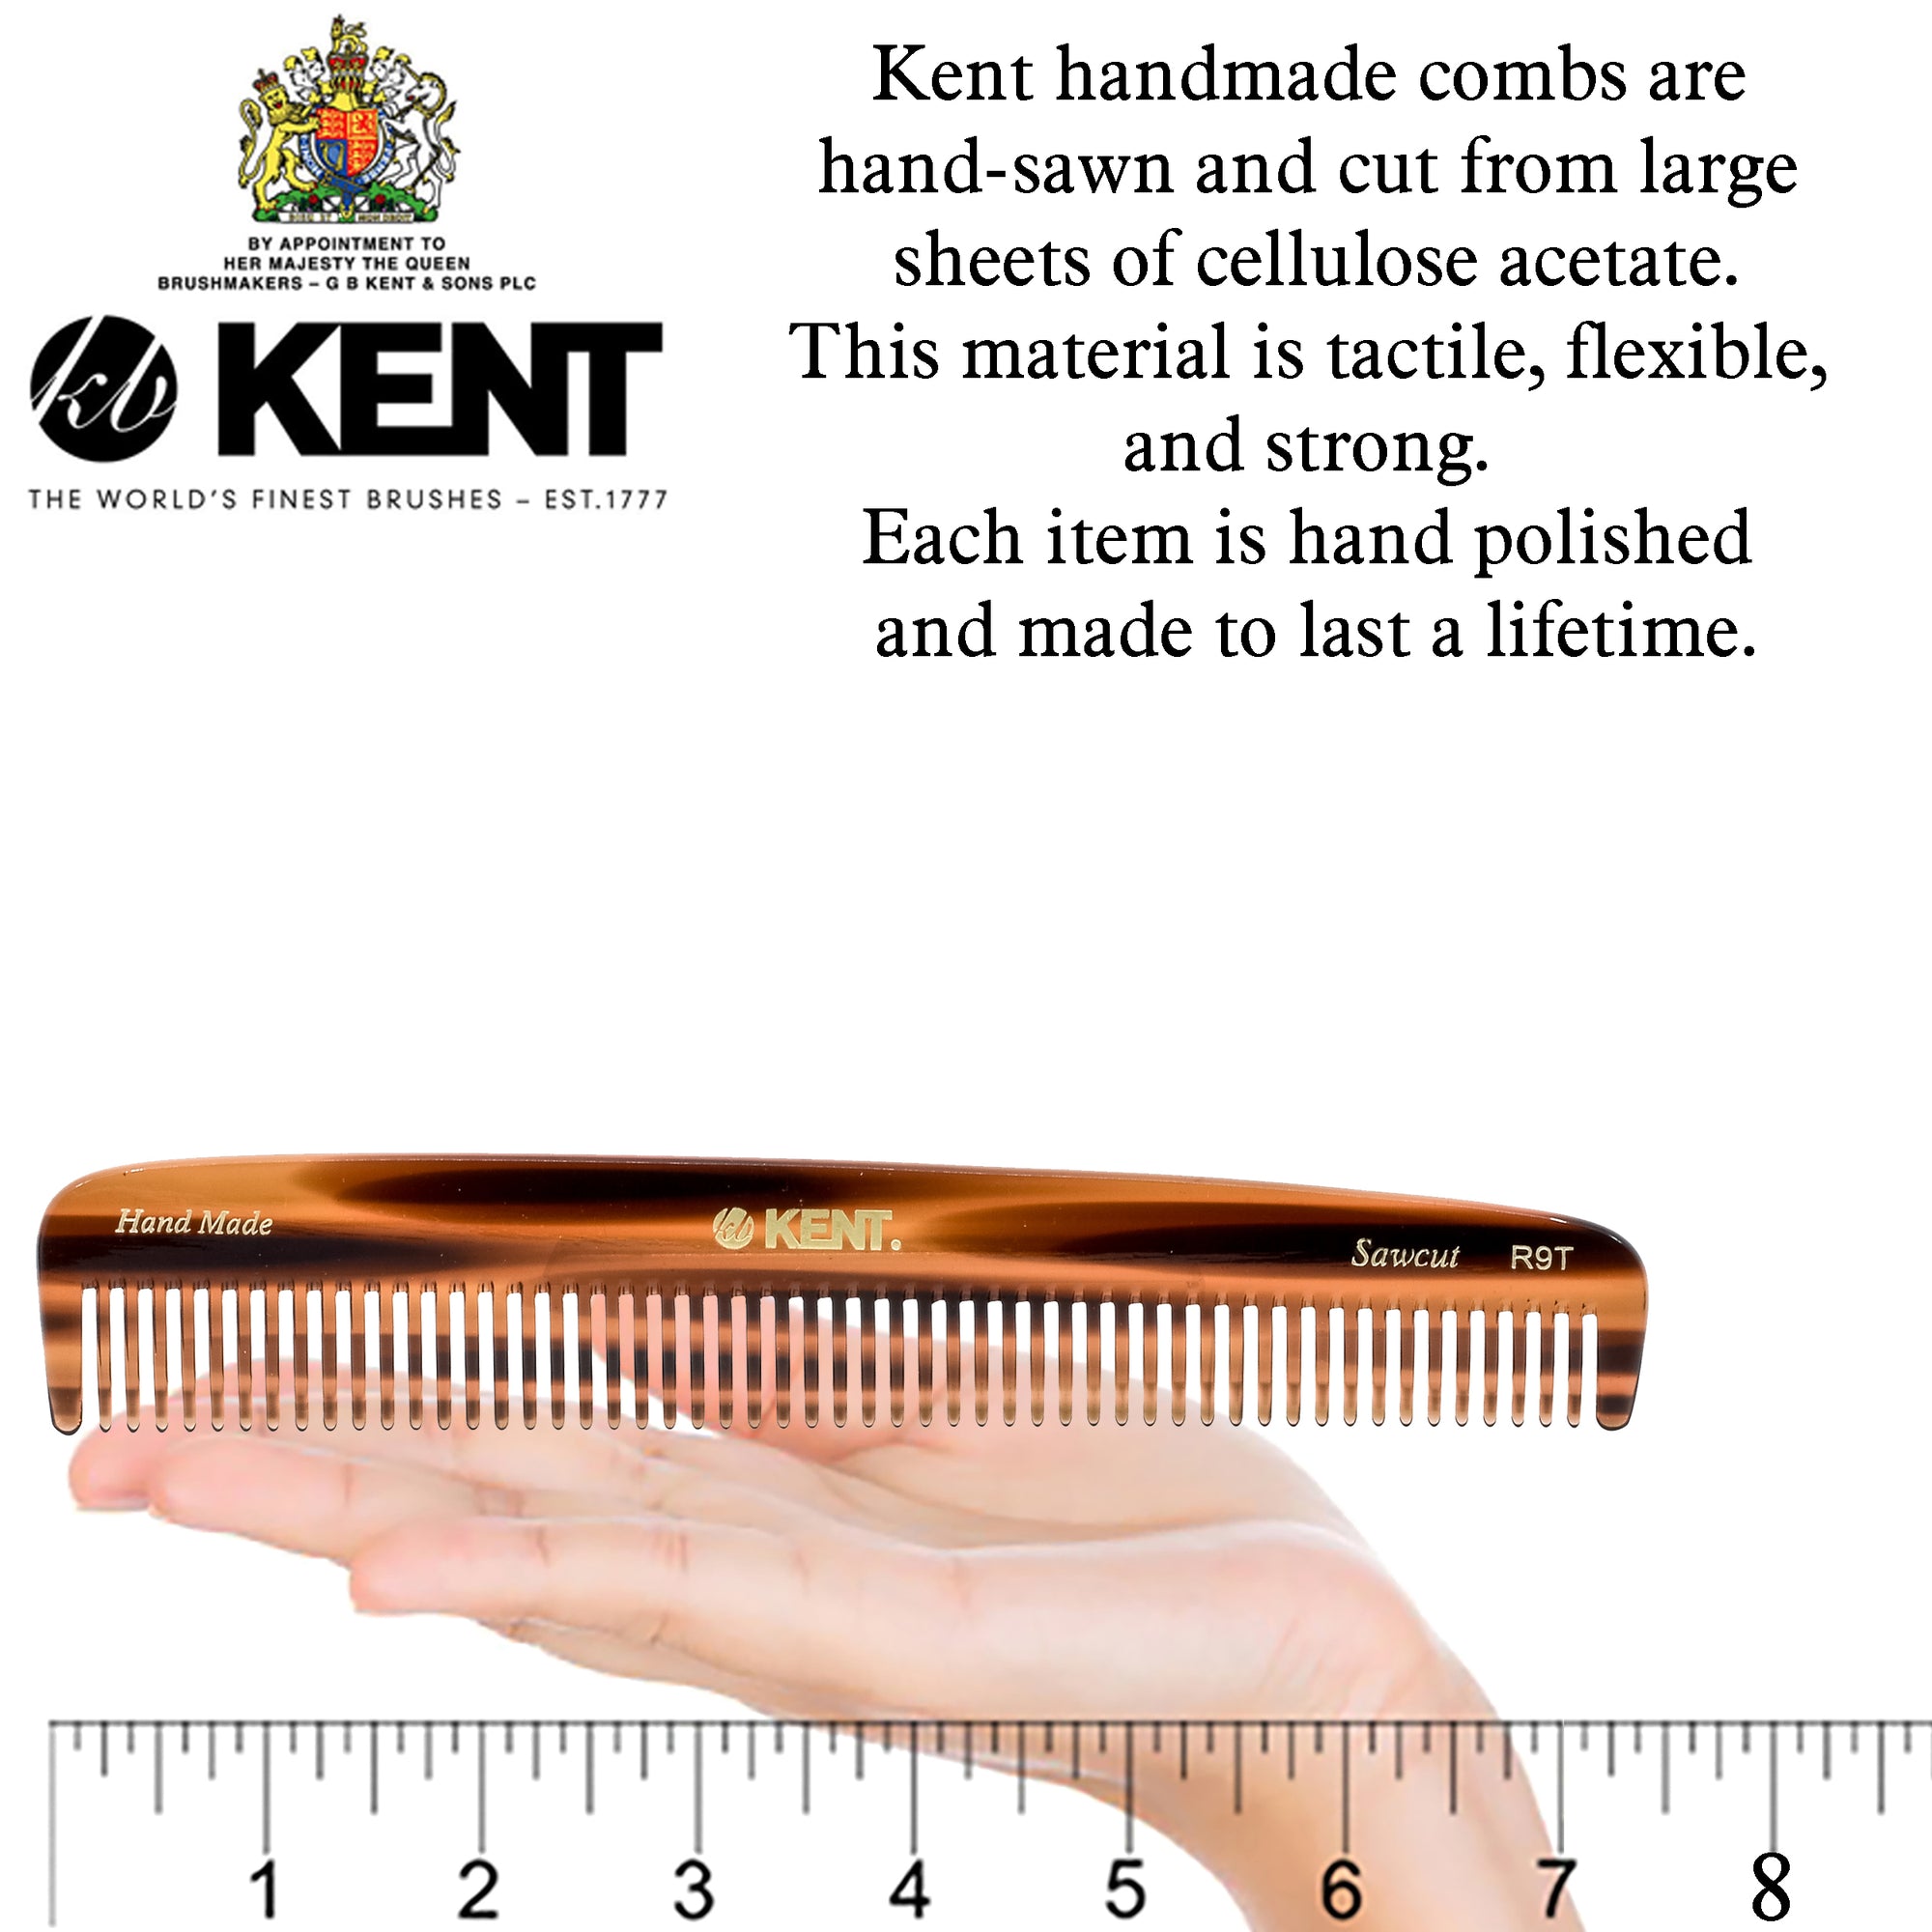 Kent R9T 7.5 Inch Handmade Wide Teeth Comb for Thick Curly Wavy Hair